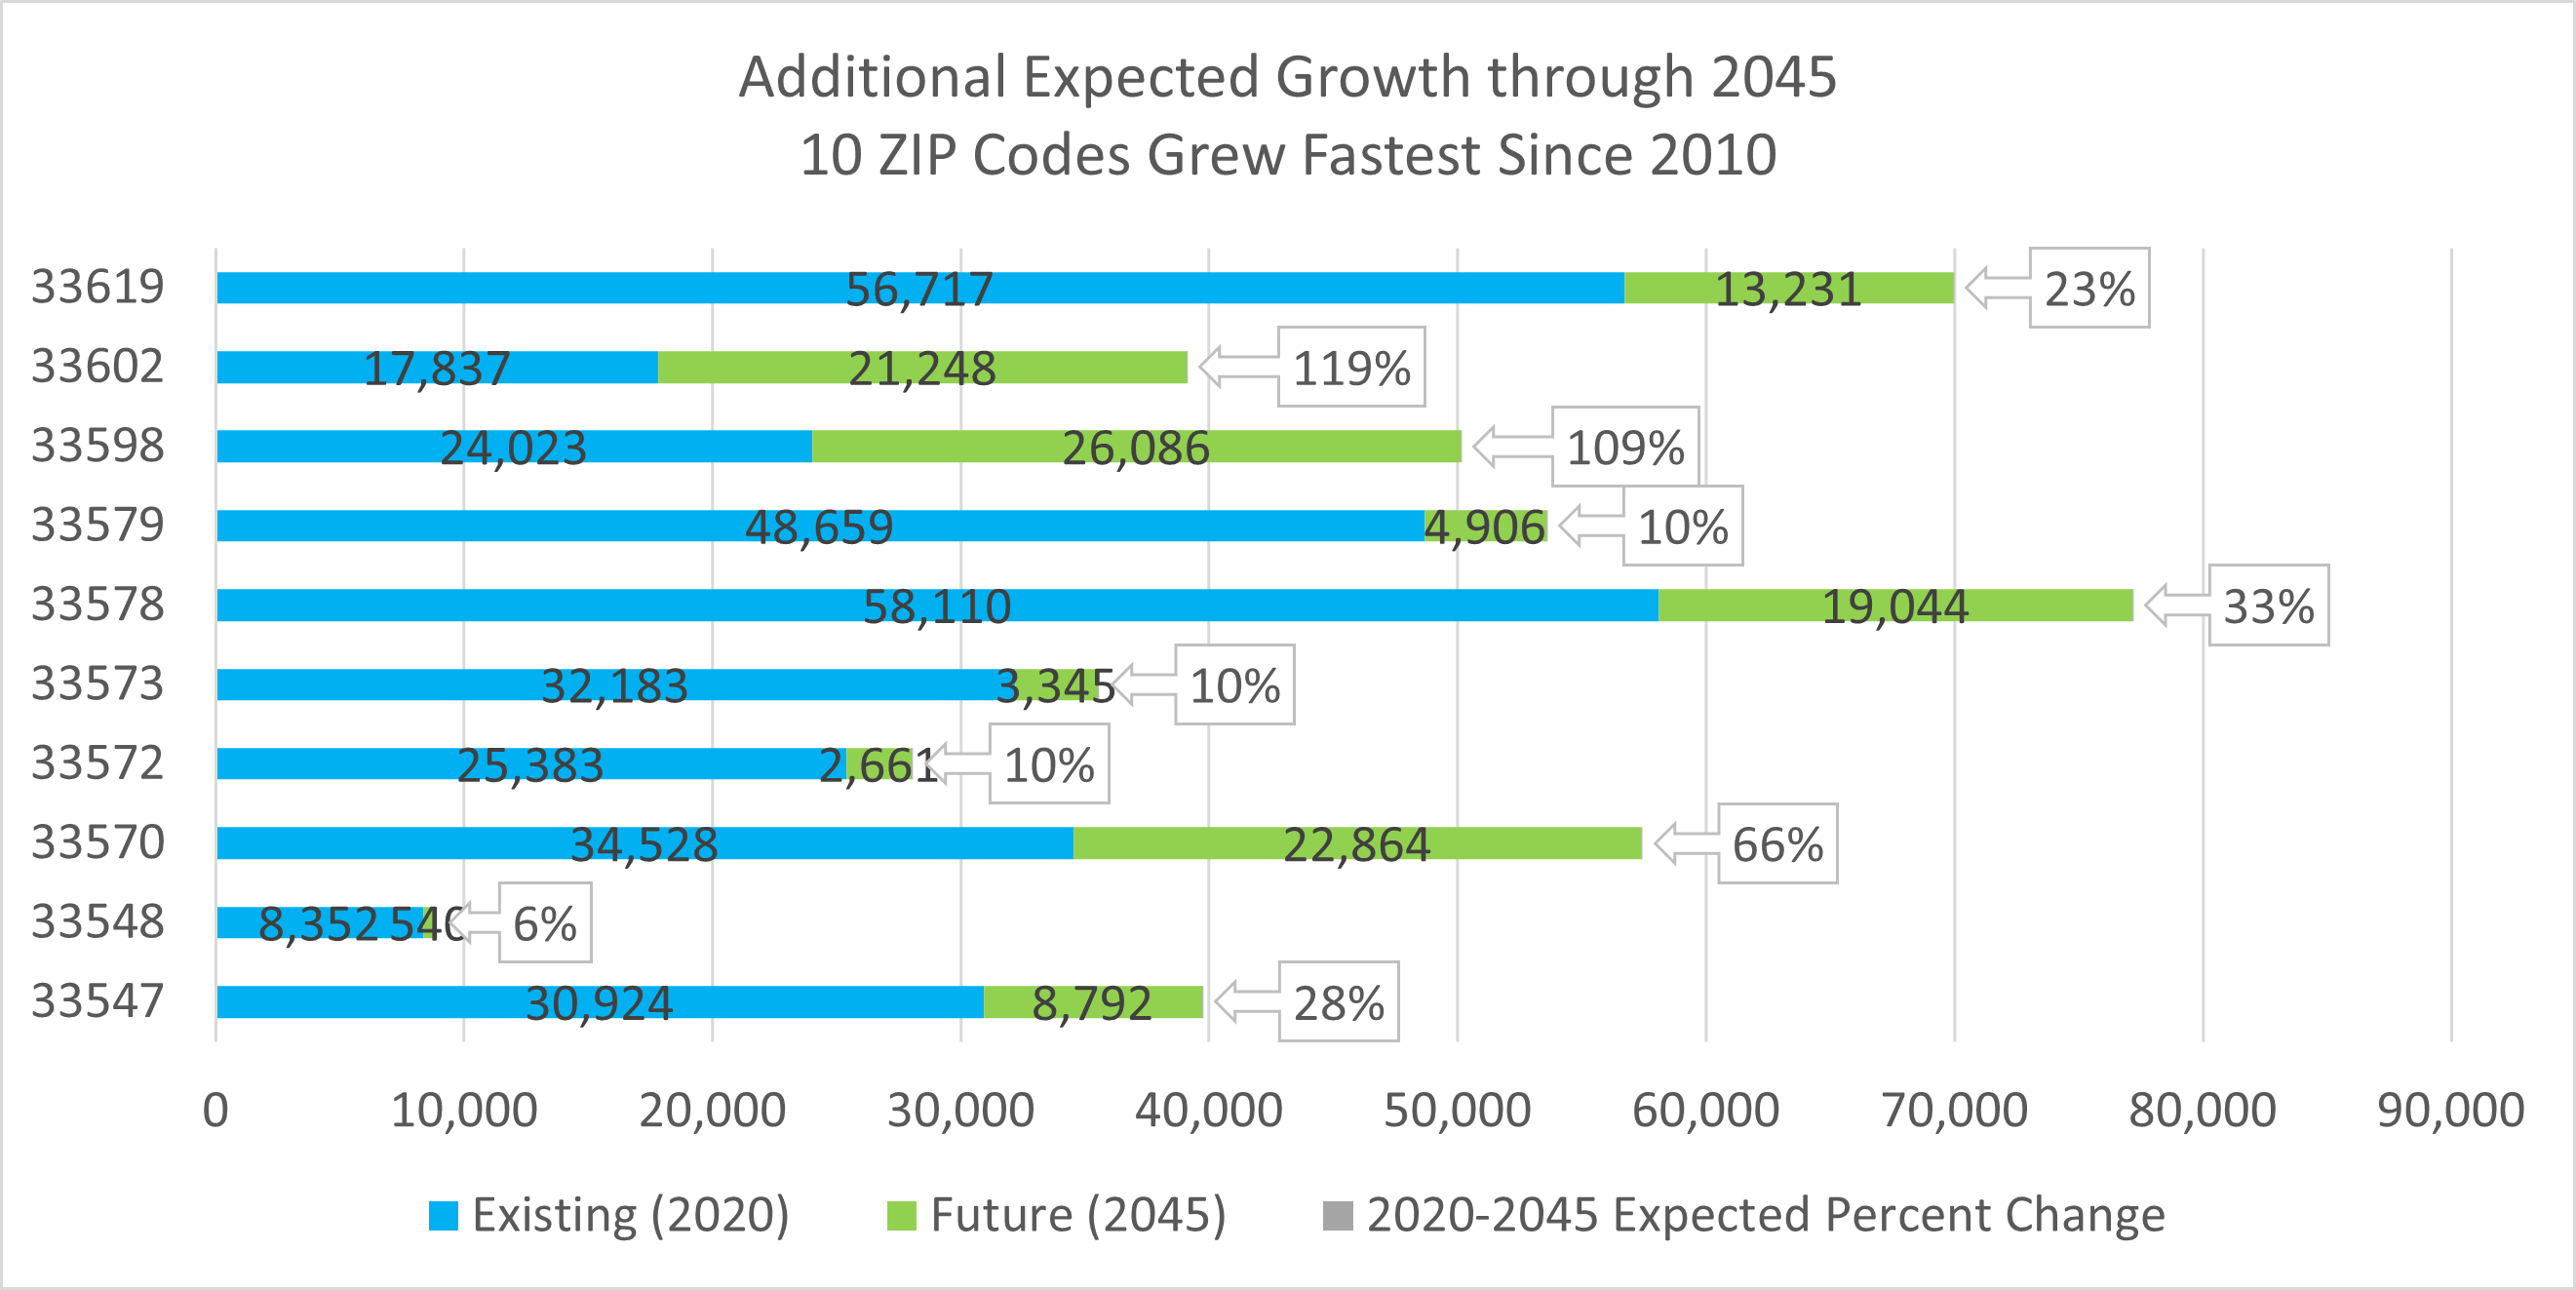 This horizontal stacked chart shows 2020 population for 10 ZIP Codes with highest growth since 2010. It also shows new population through 2045. On average, these ZIP Codes are projected to receive 12,272 new residents and grow 42%. ZIP Code 33548 saw the lowest number of new residents (540 persons). Its 2045 population is projected to be 6% higher than 2020. ZIP Code 33598 saw the highest number of new residents (26,086 persons). Its 2045 population is projected to be 109% higher than 2020.